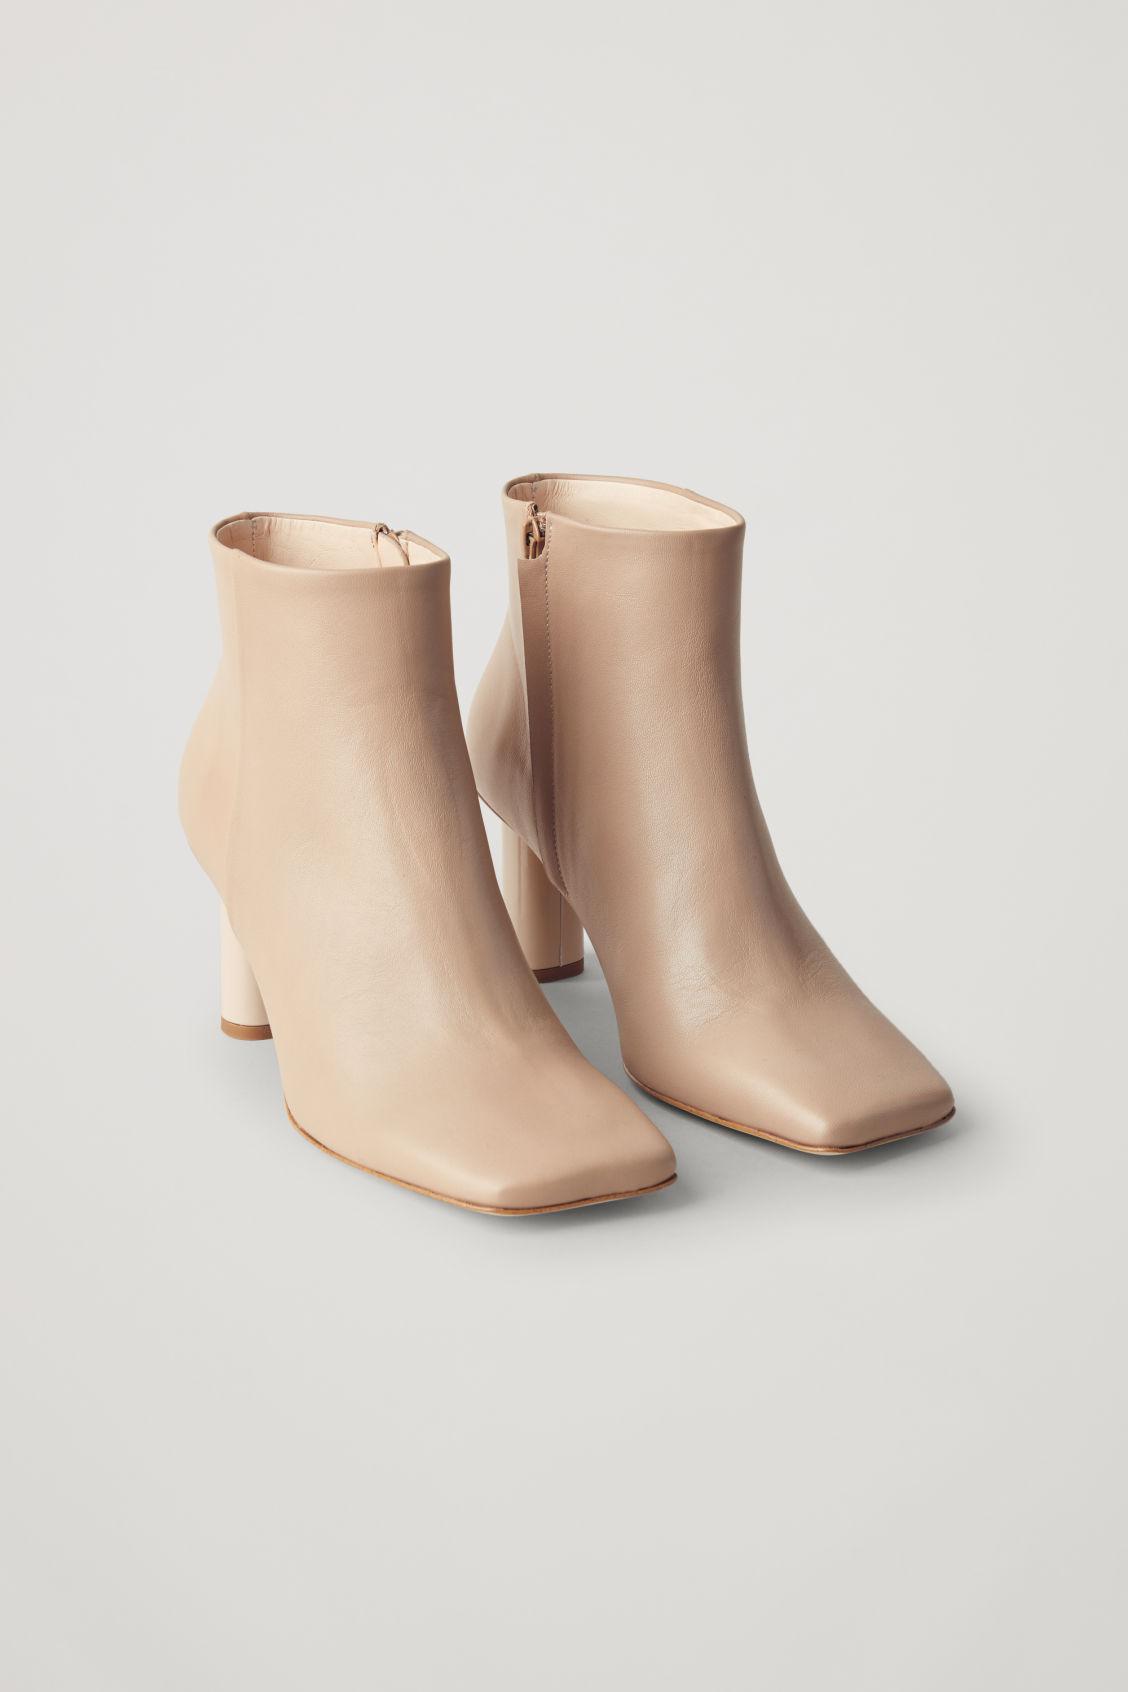 COS Square Toe Leather Ankle Boots in Natural | Lyst